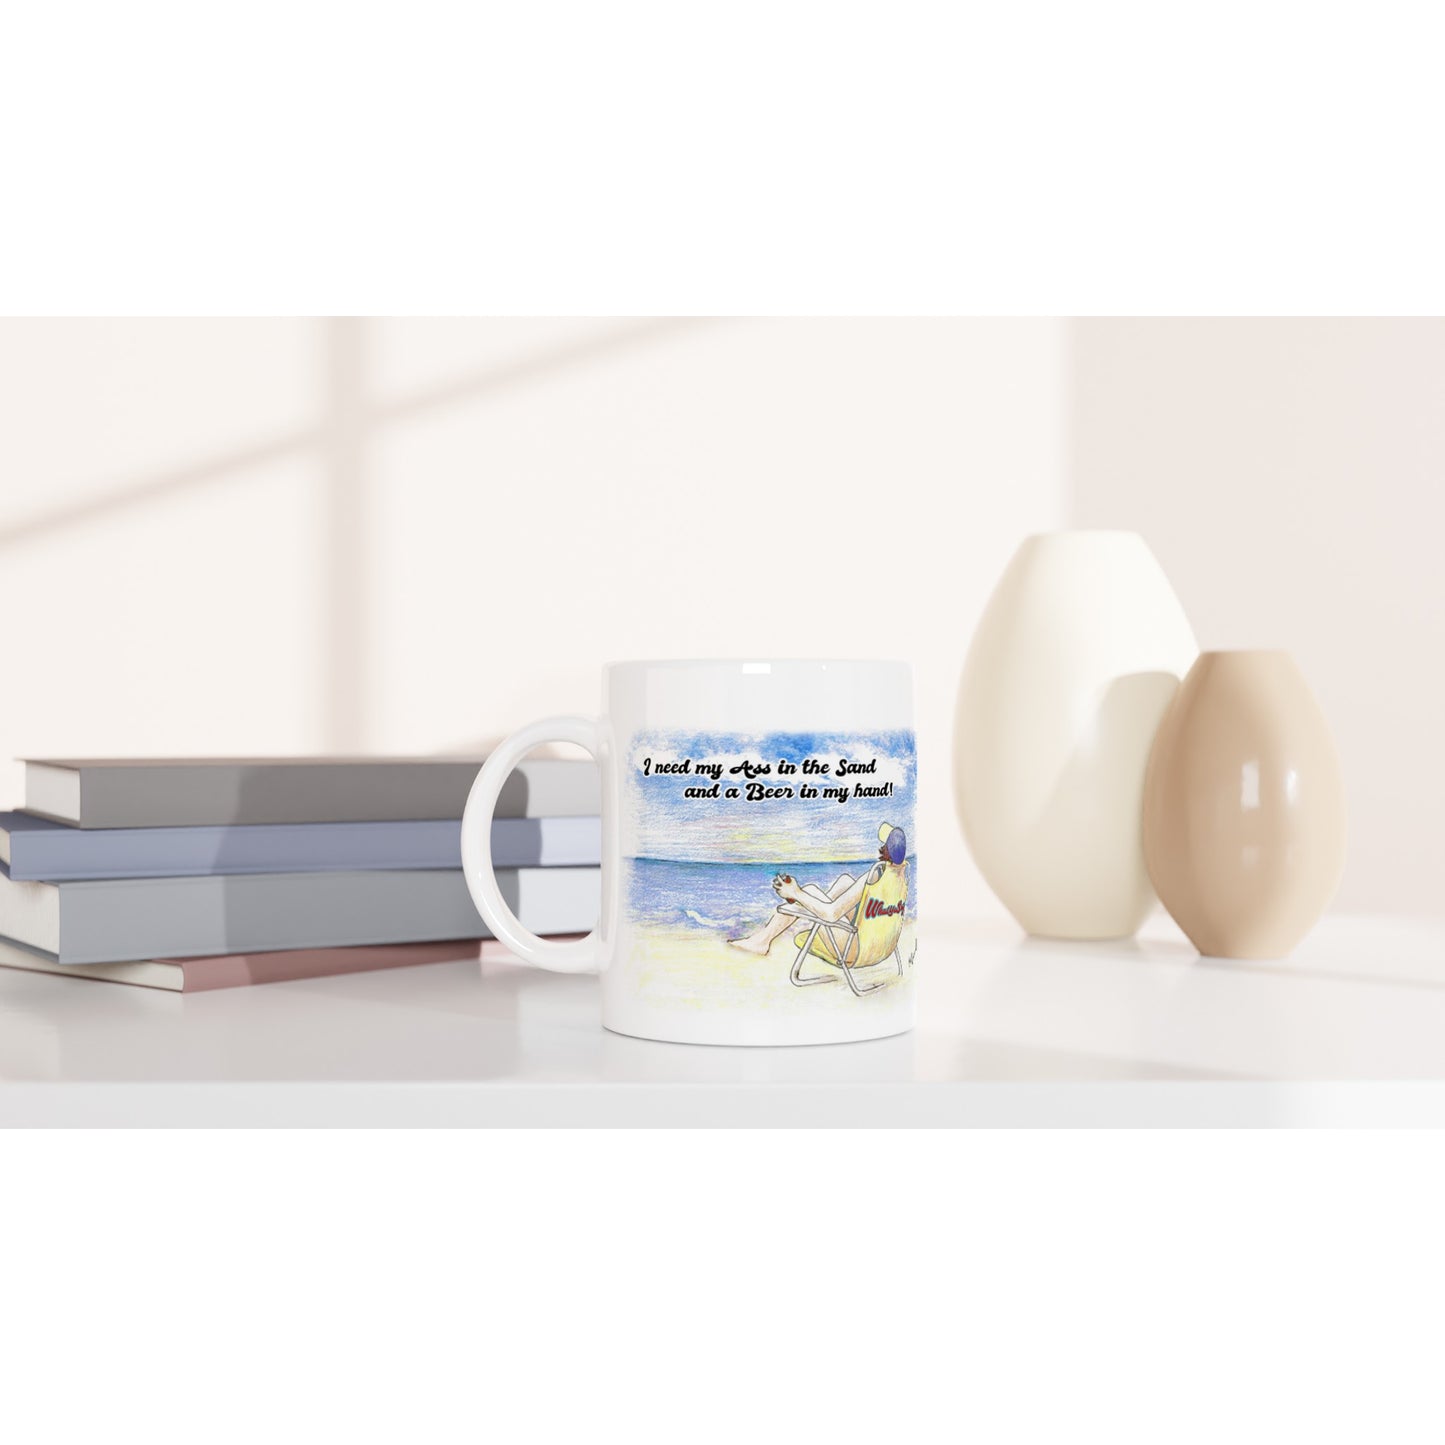 A white ceramic 11oz mug with motto I need my Ass in the Sand and a Beer in my hand on front and WhatYa Say logo on back dishwasher and microwave safe from WhatYa Say Apparel sitting on coffee table with books and two vases.